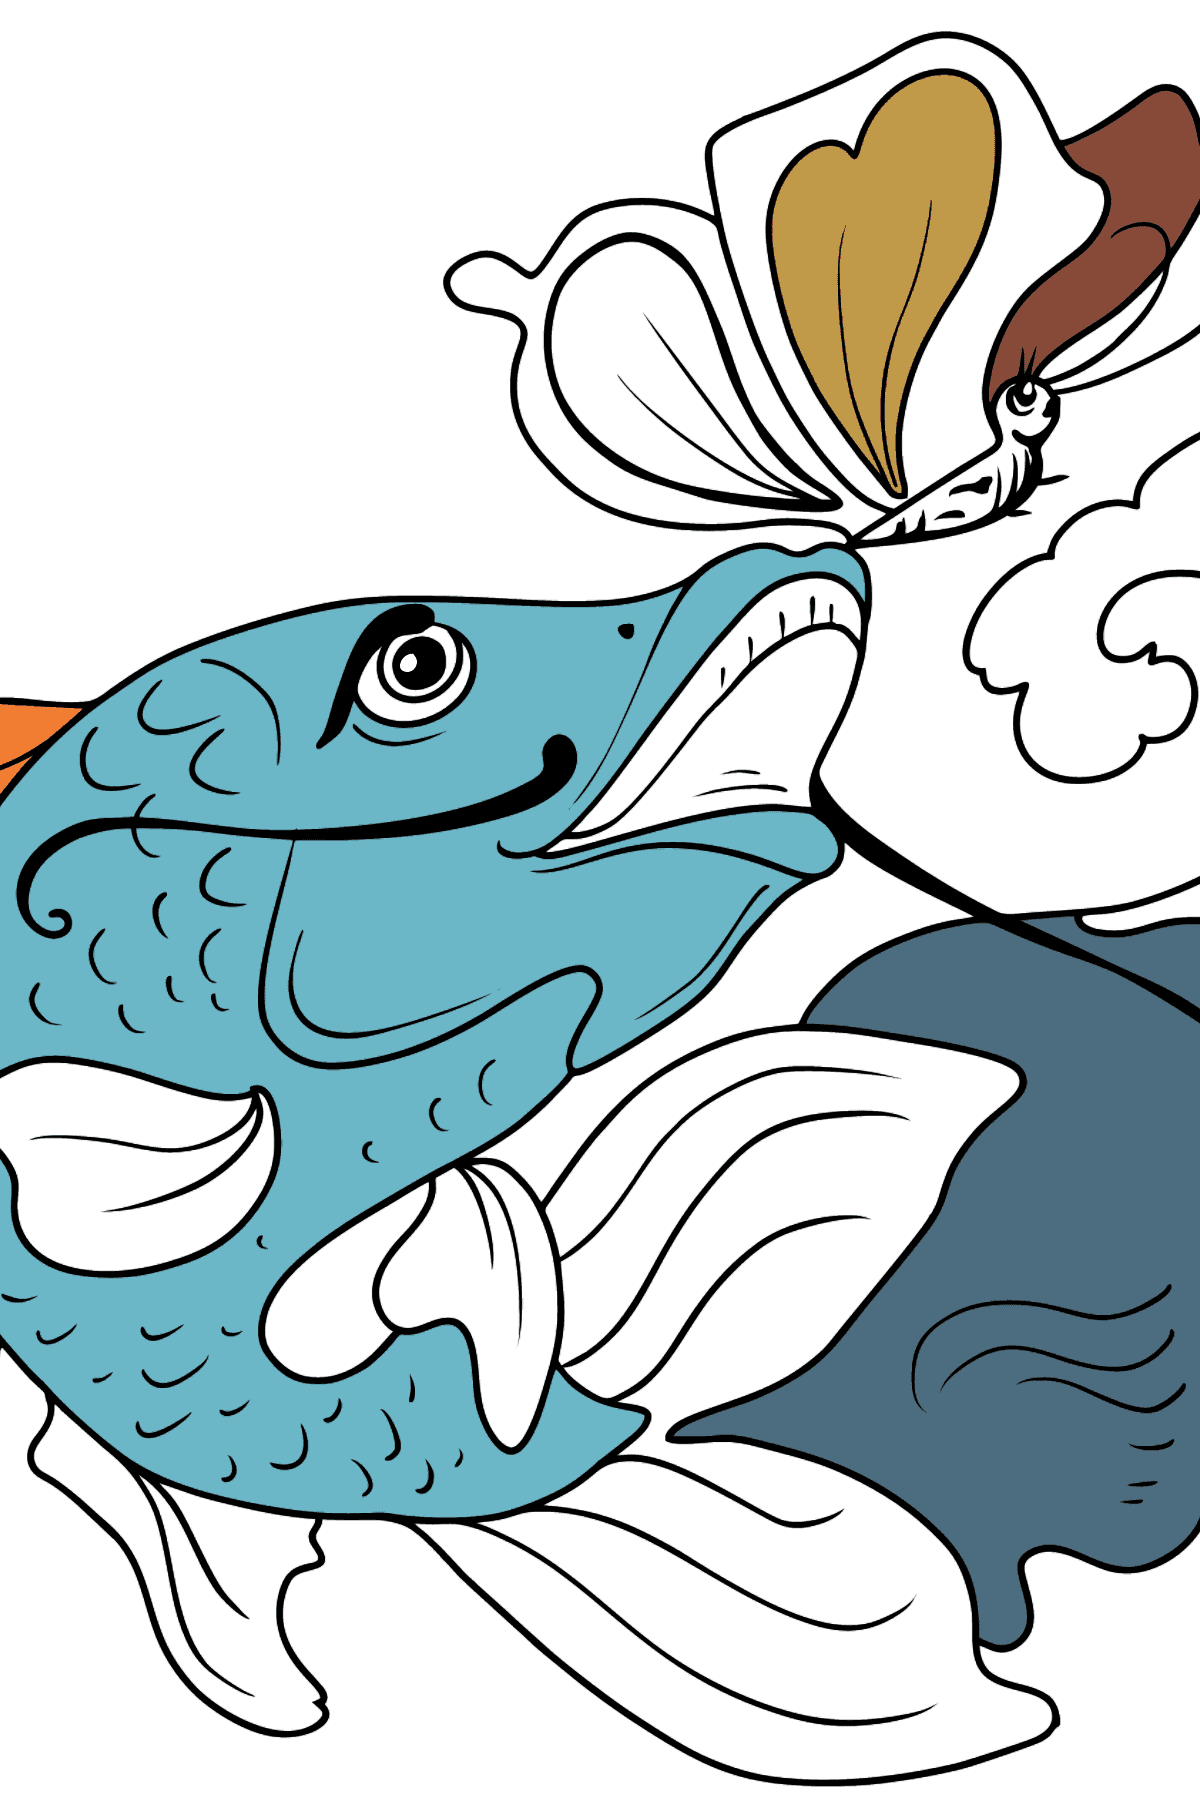 Fish and Butterfly coloring page - Coloring Pages for Kids